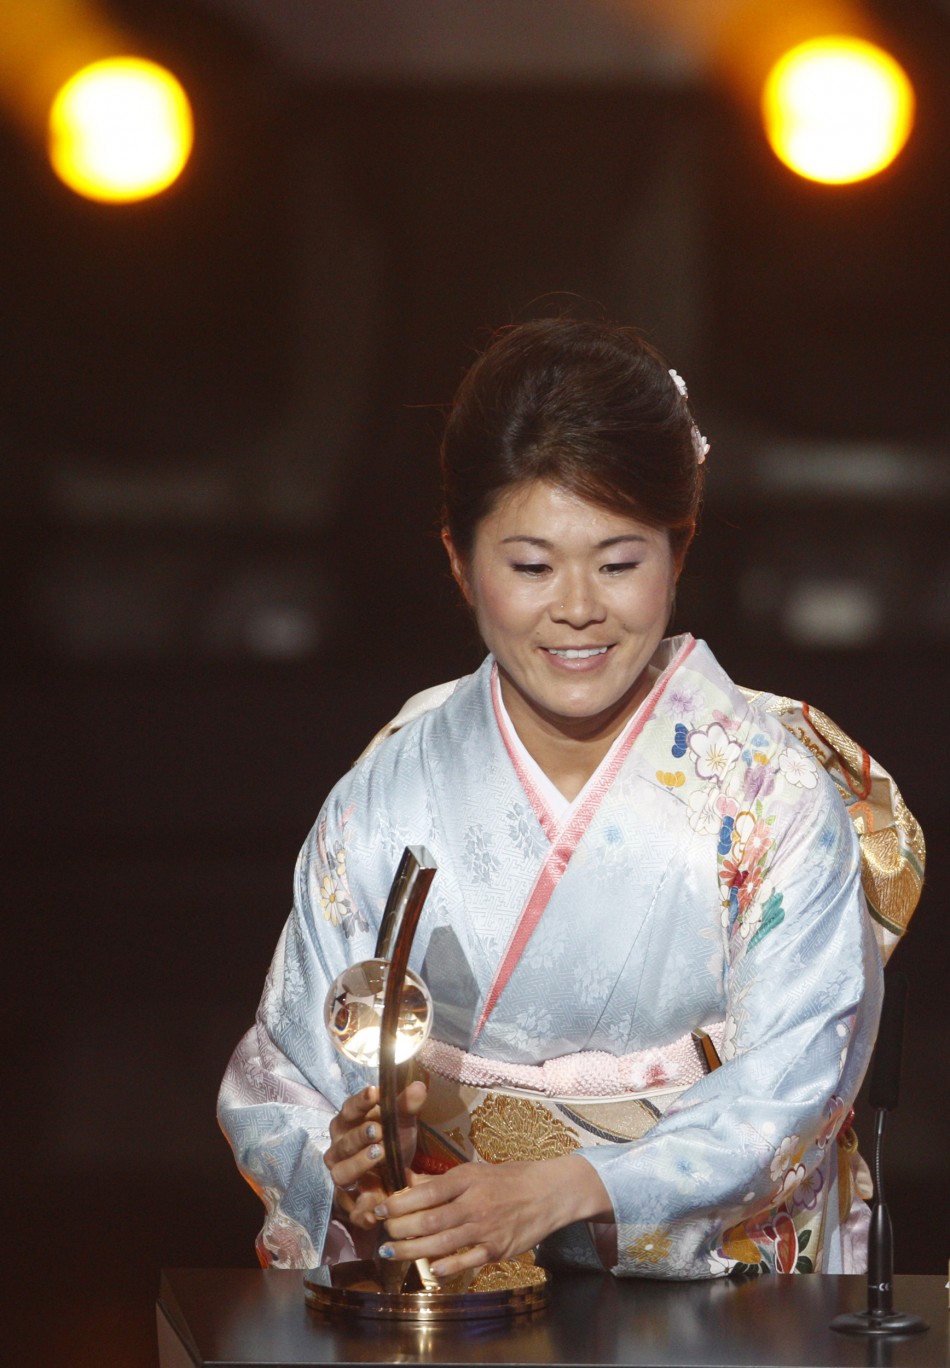 Sawa wins the Womens Player of the Year